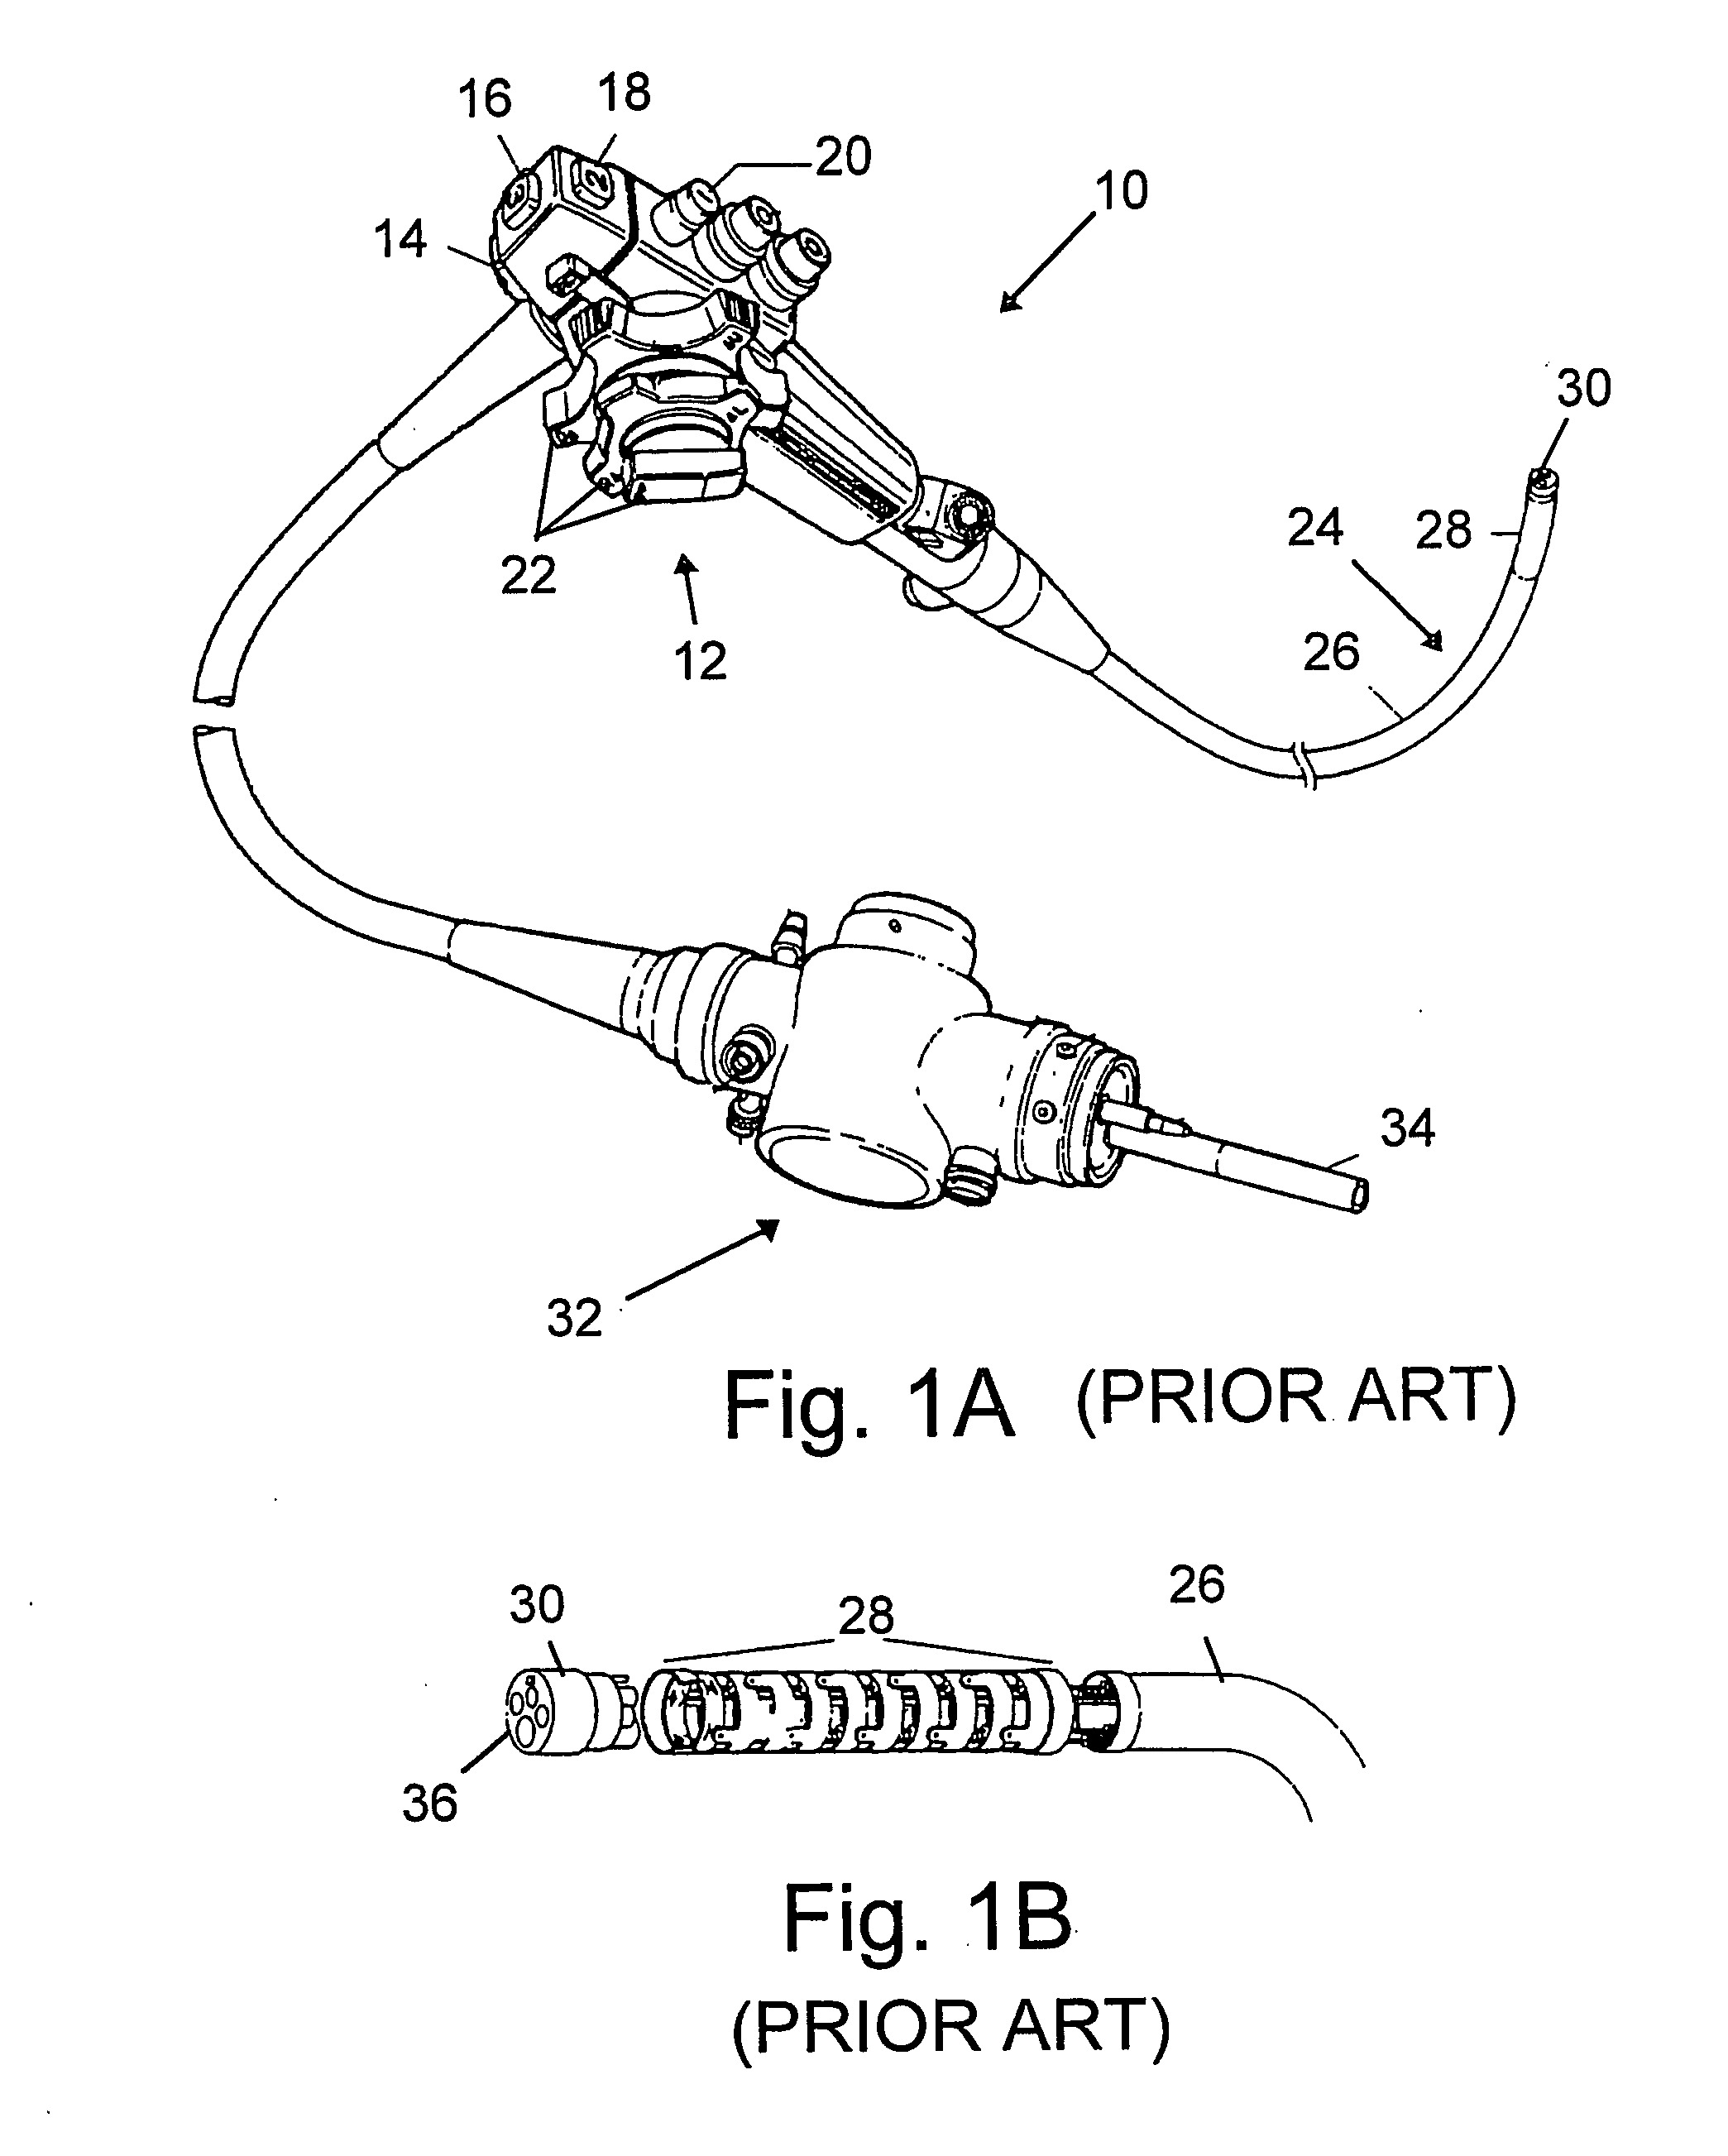 Devices and methods for treating morbid obesity